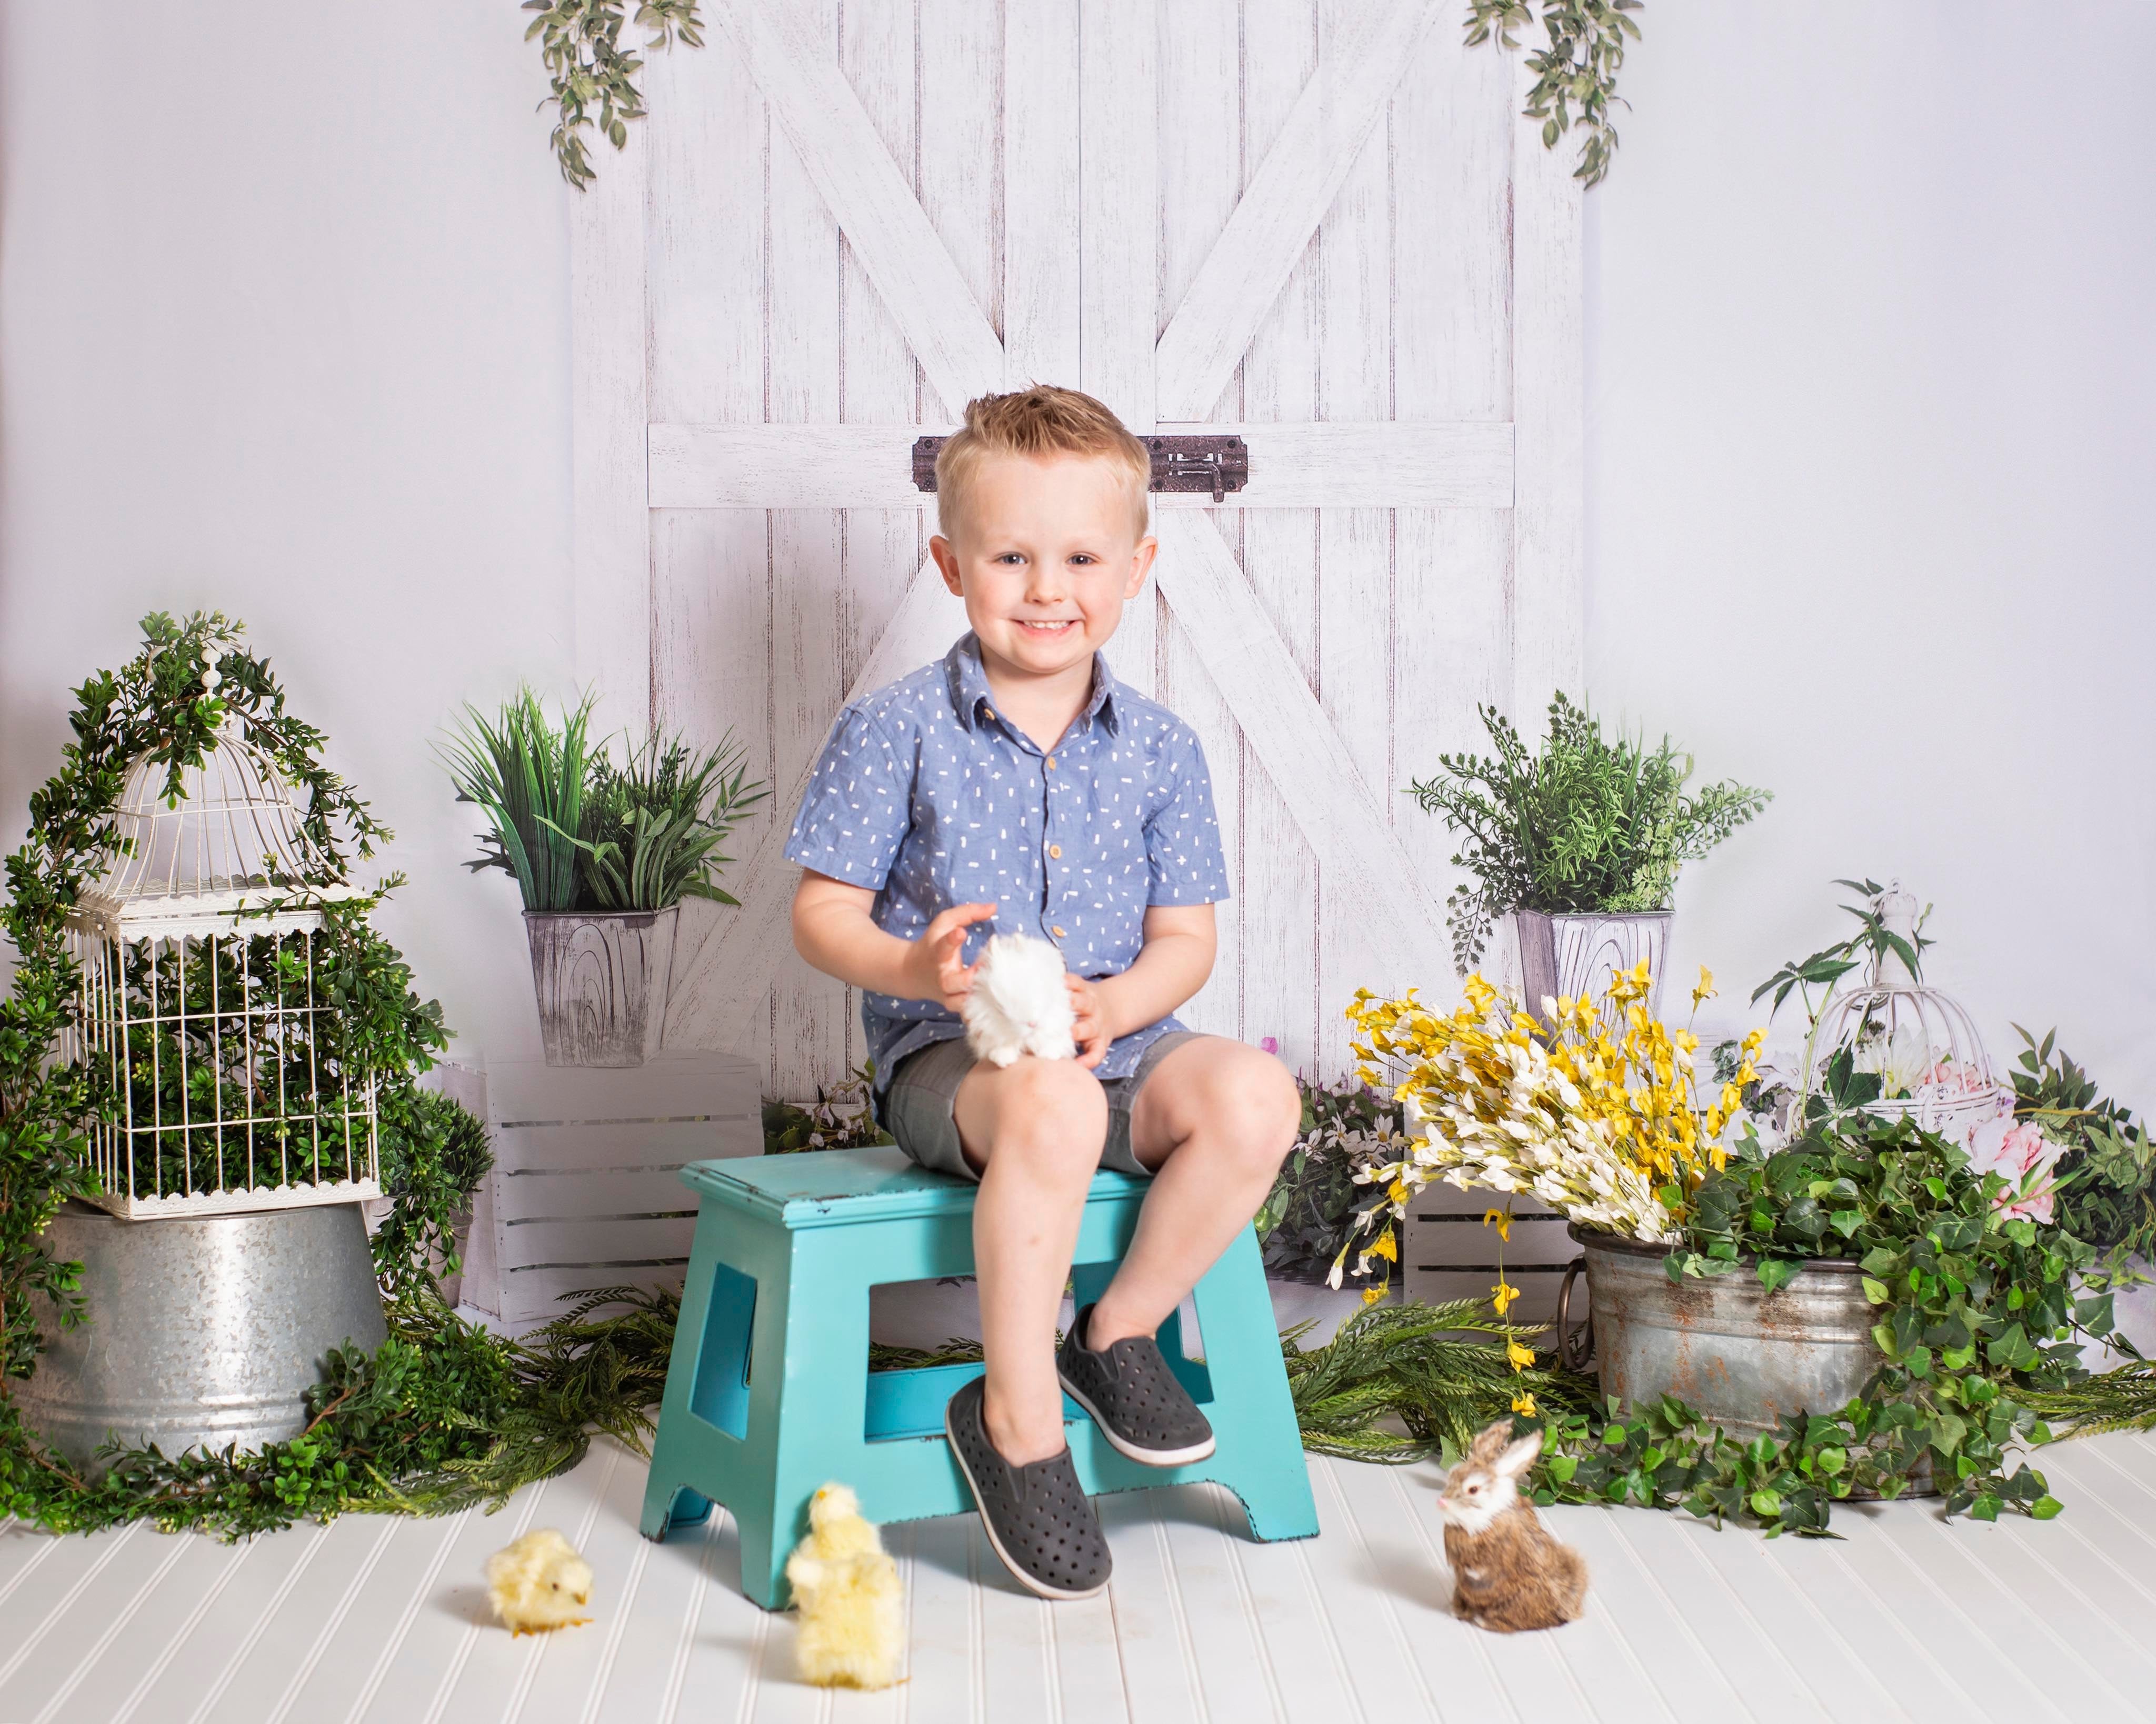 Kate Spring/Easter White Barn Door Backdrop Designed By Jerry_Sina